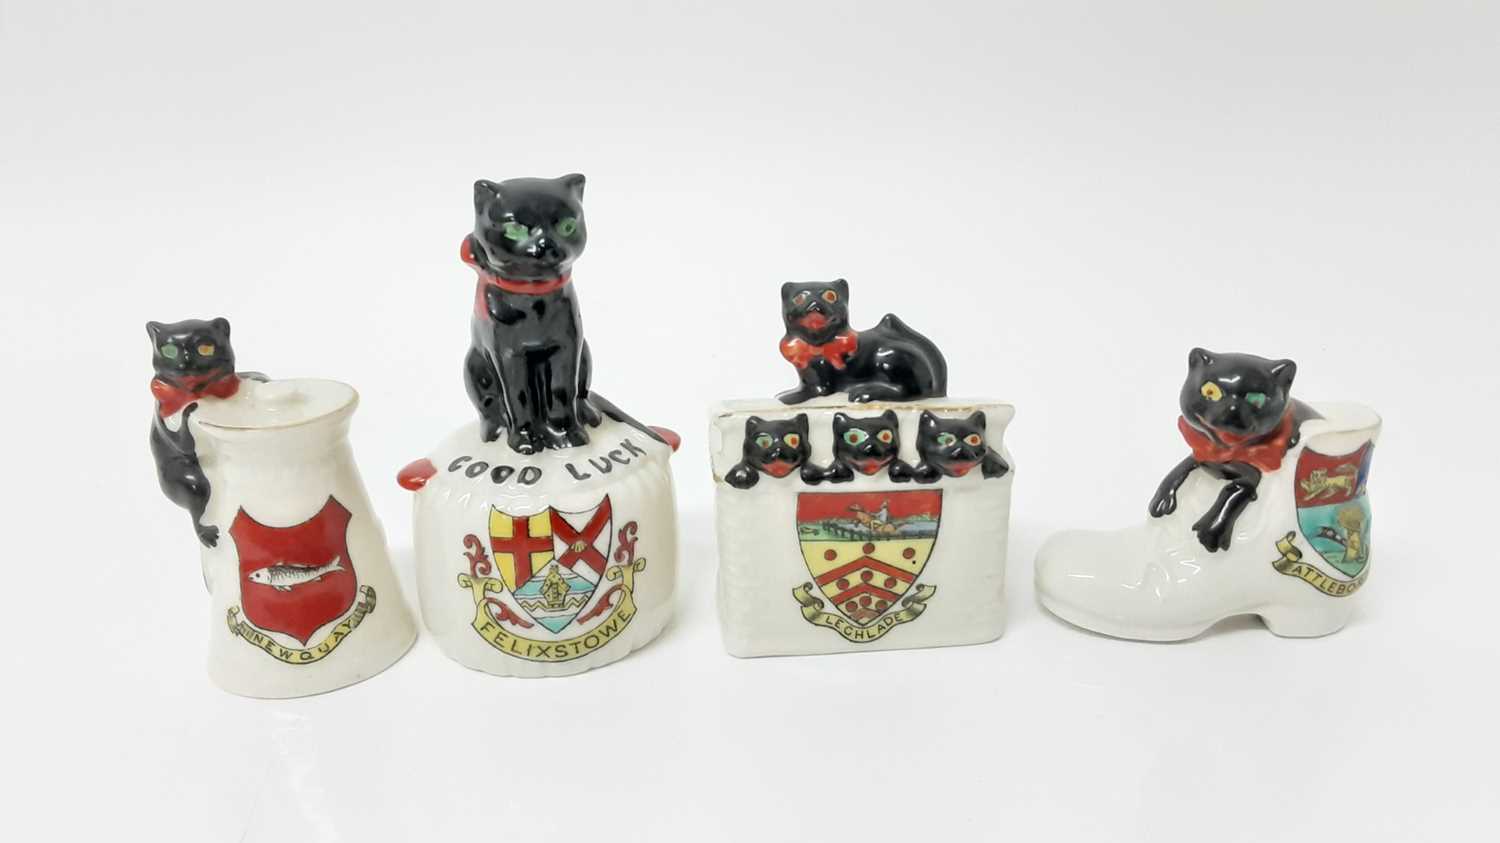 Lot 143 - Four Arcadian Crested China Black Cats - Good Luck Felixstowe, Lechlade, Newquay and Attleborough